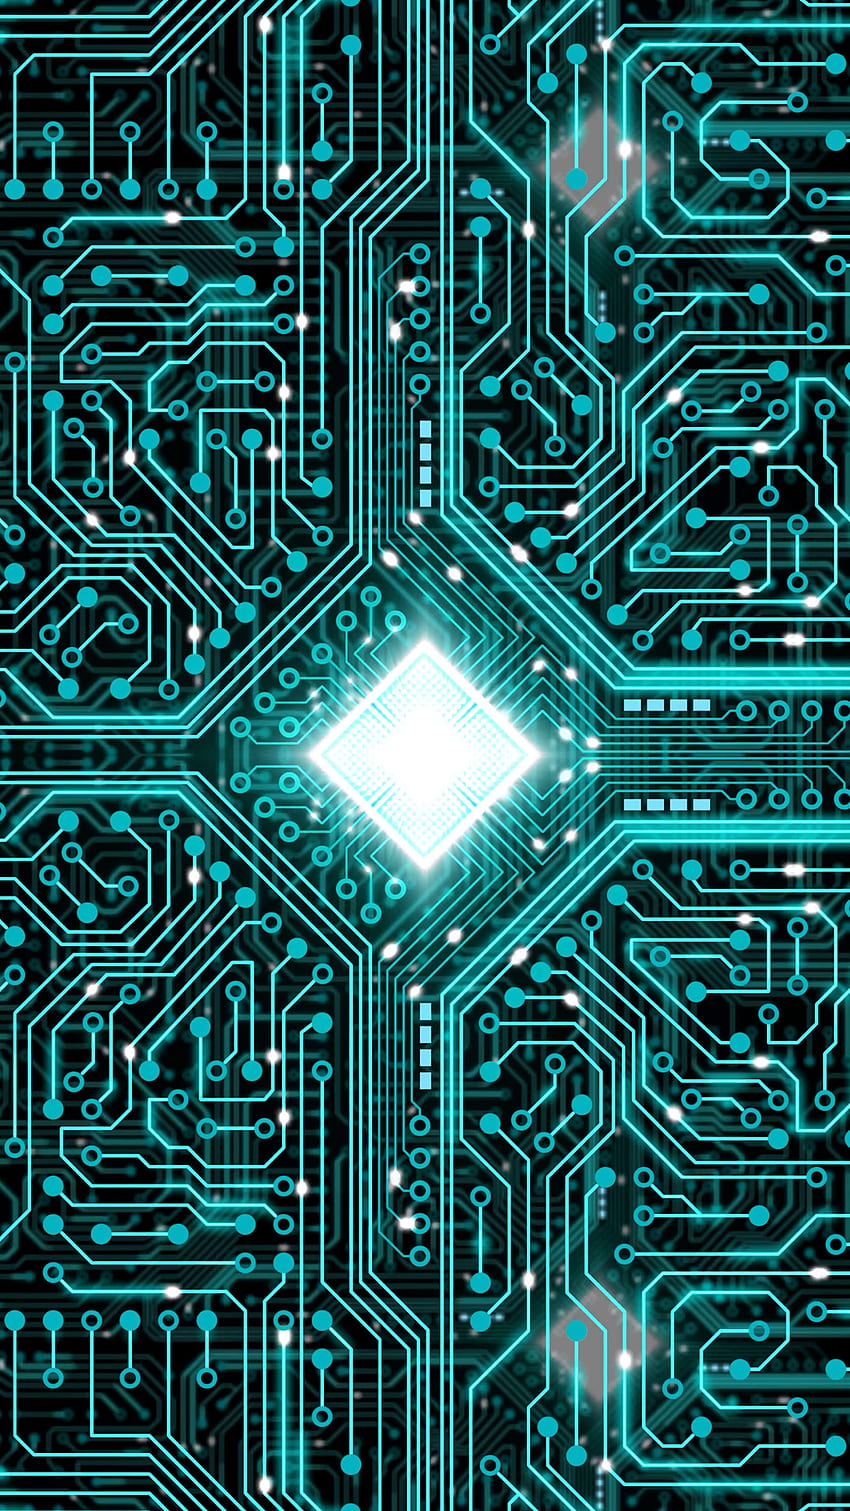 printed circuit board, central processing unit, integrated circuits chips, chipset. Technology , Electronics , Phone design, Robot Pattern HD phone wallpaper